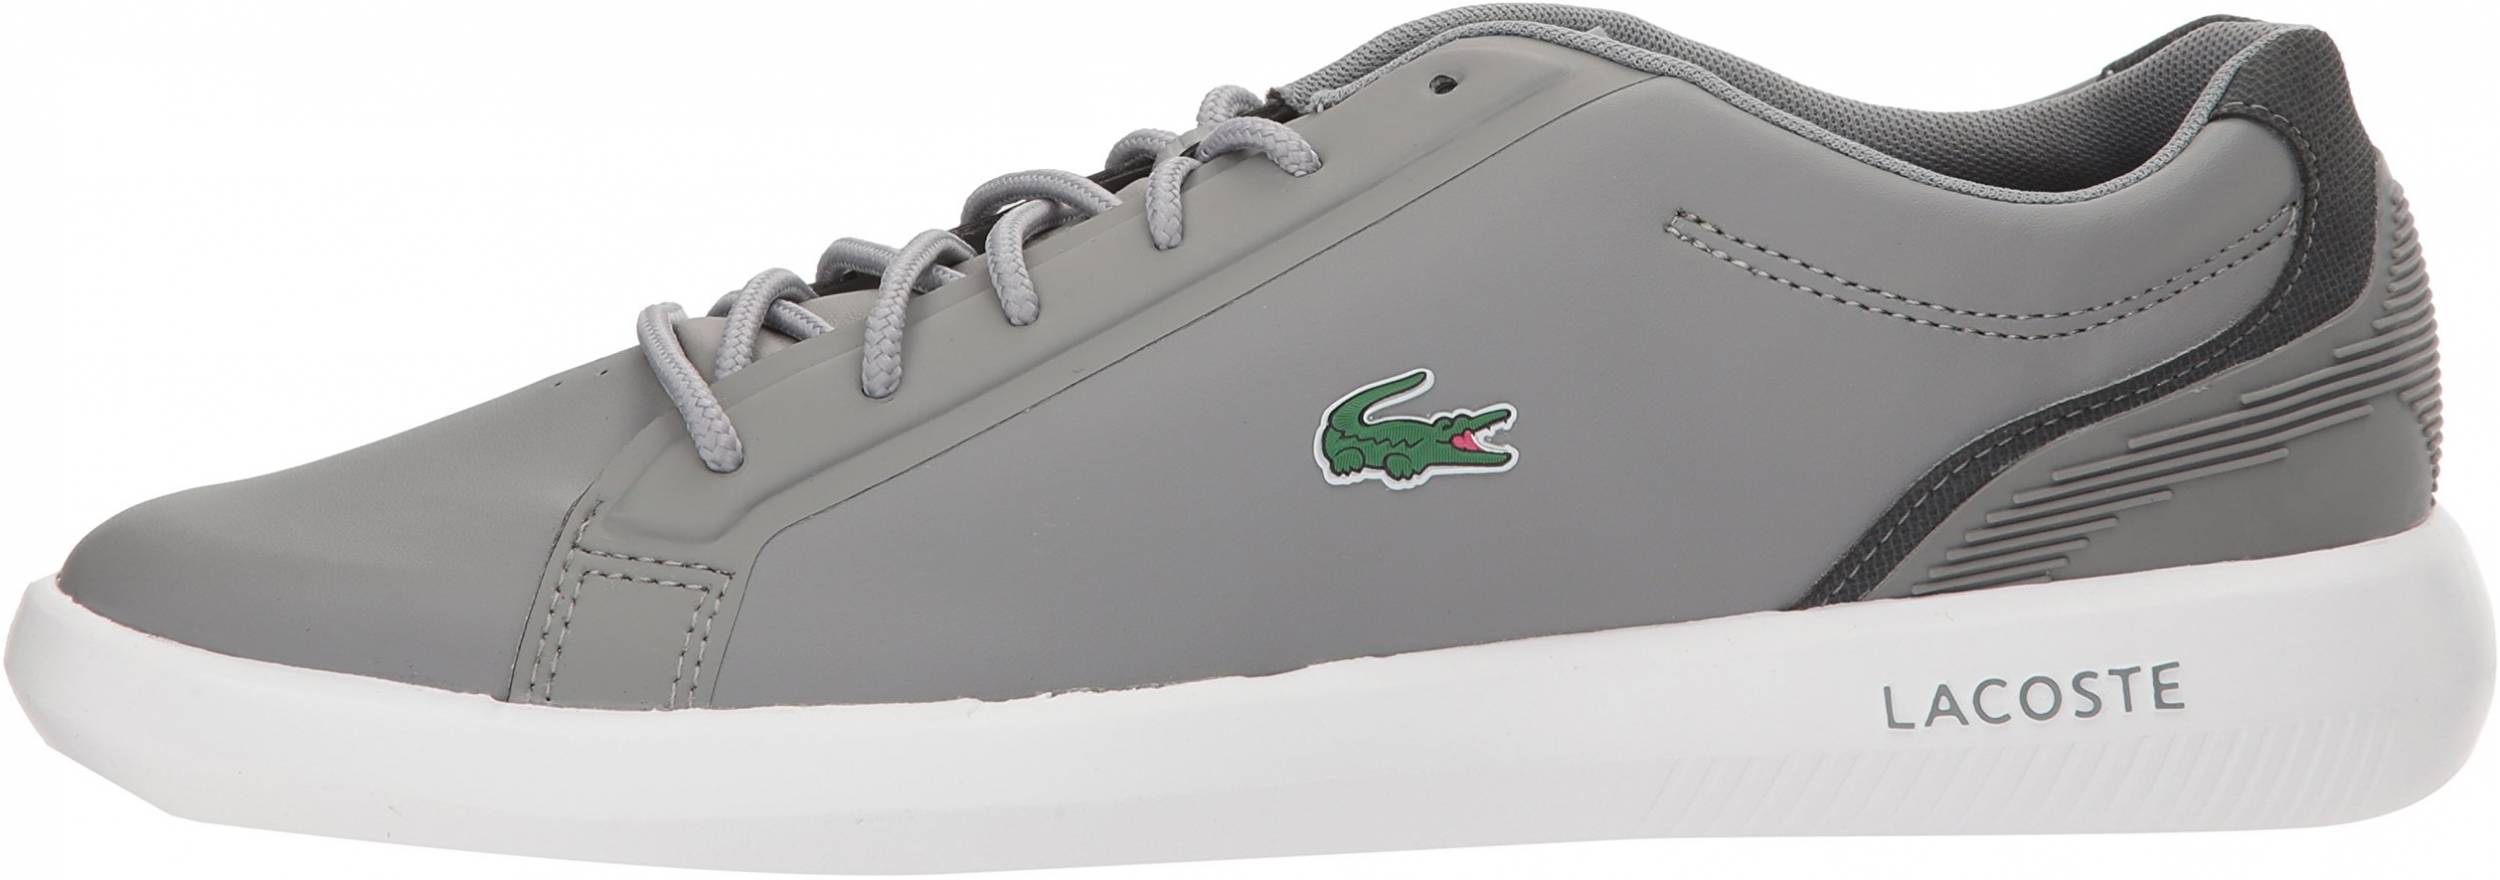 Only $36 + Review of Lacoste Avantor 